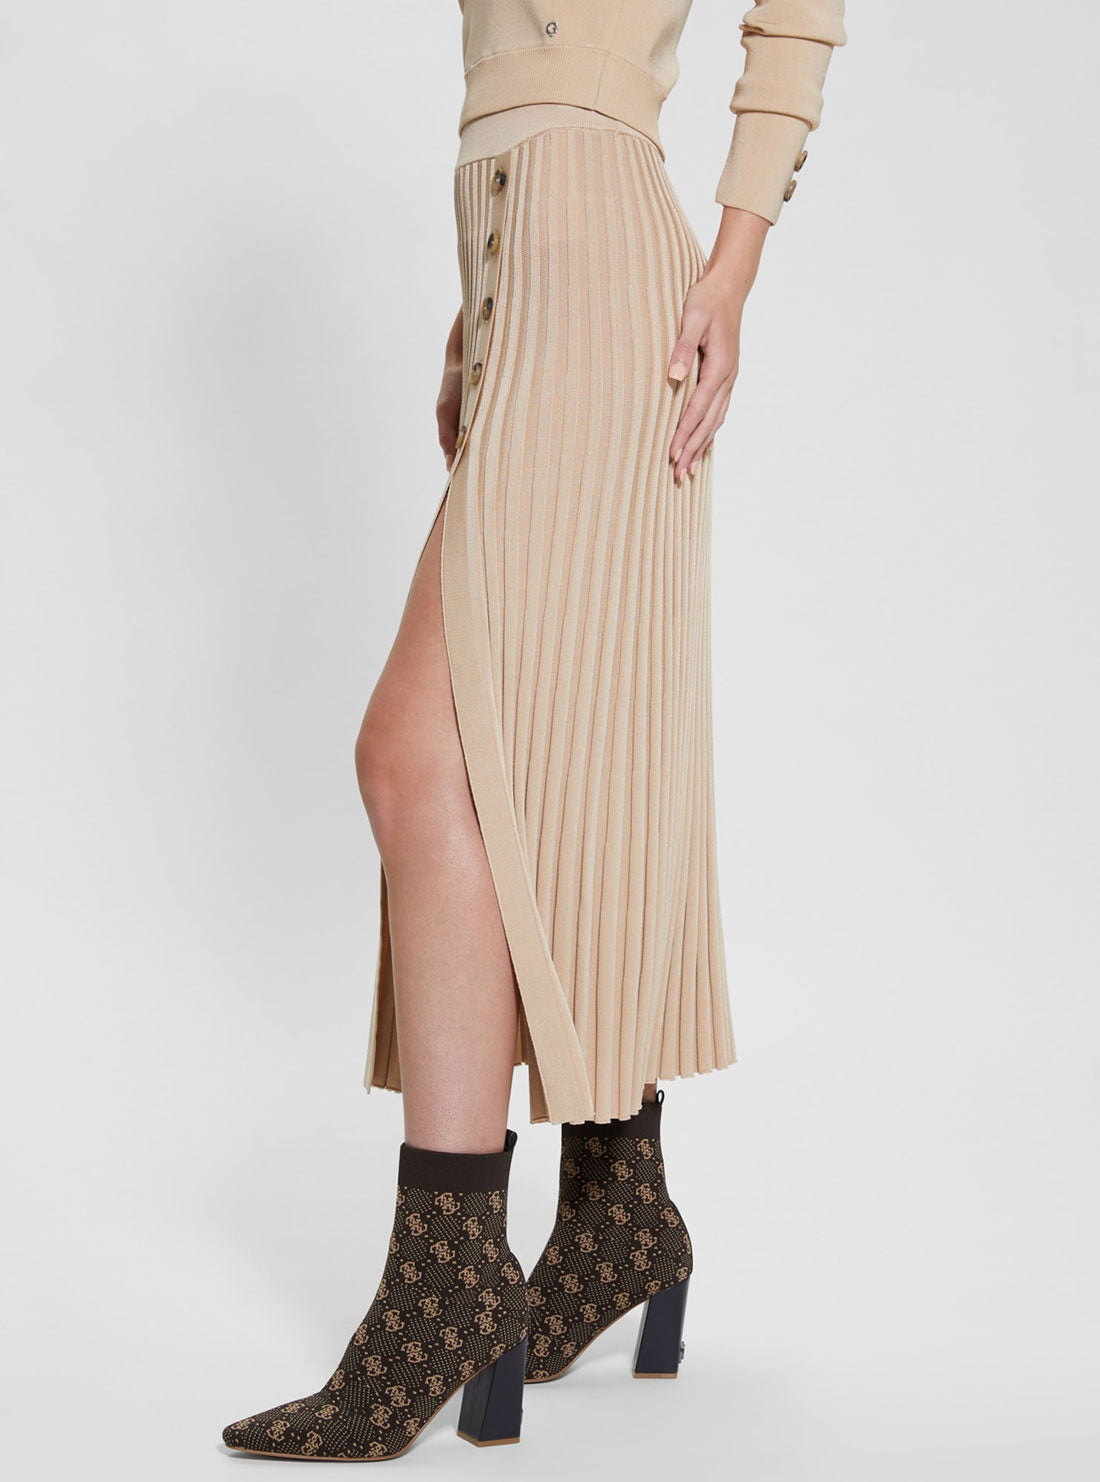 GUESS Beige Shopie Pleated Knit Skirt side view